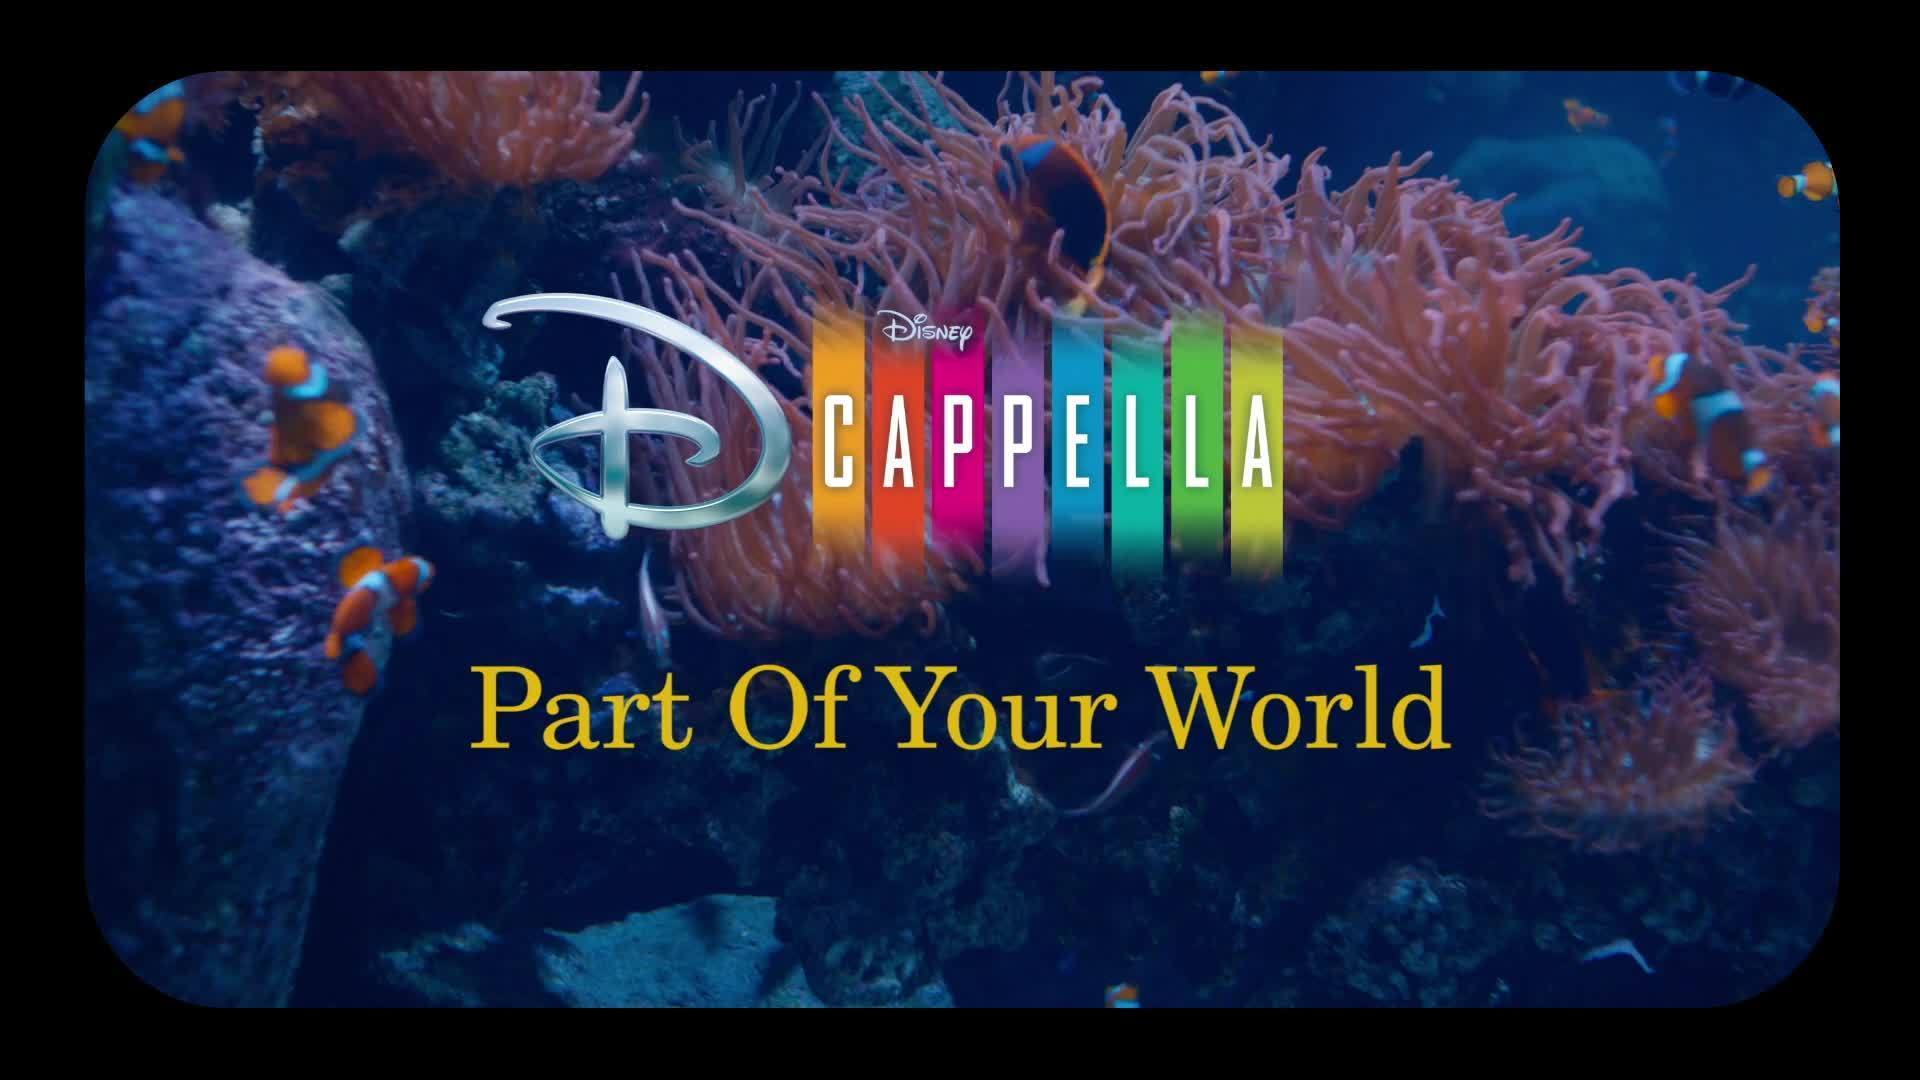 DCappella - Part of Your World